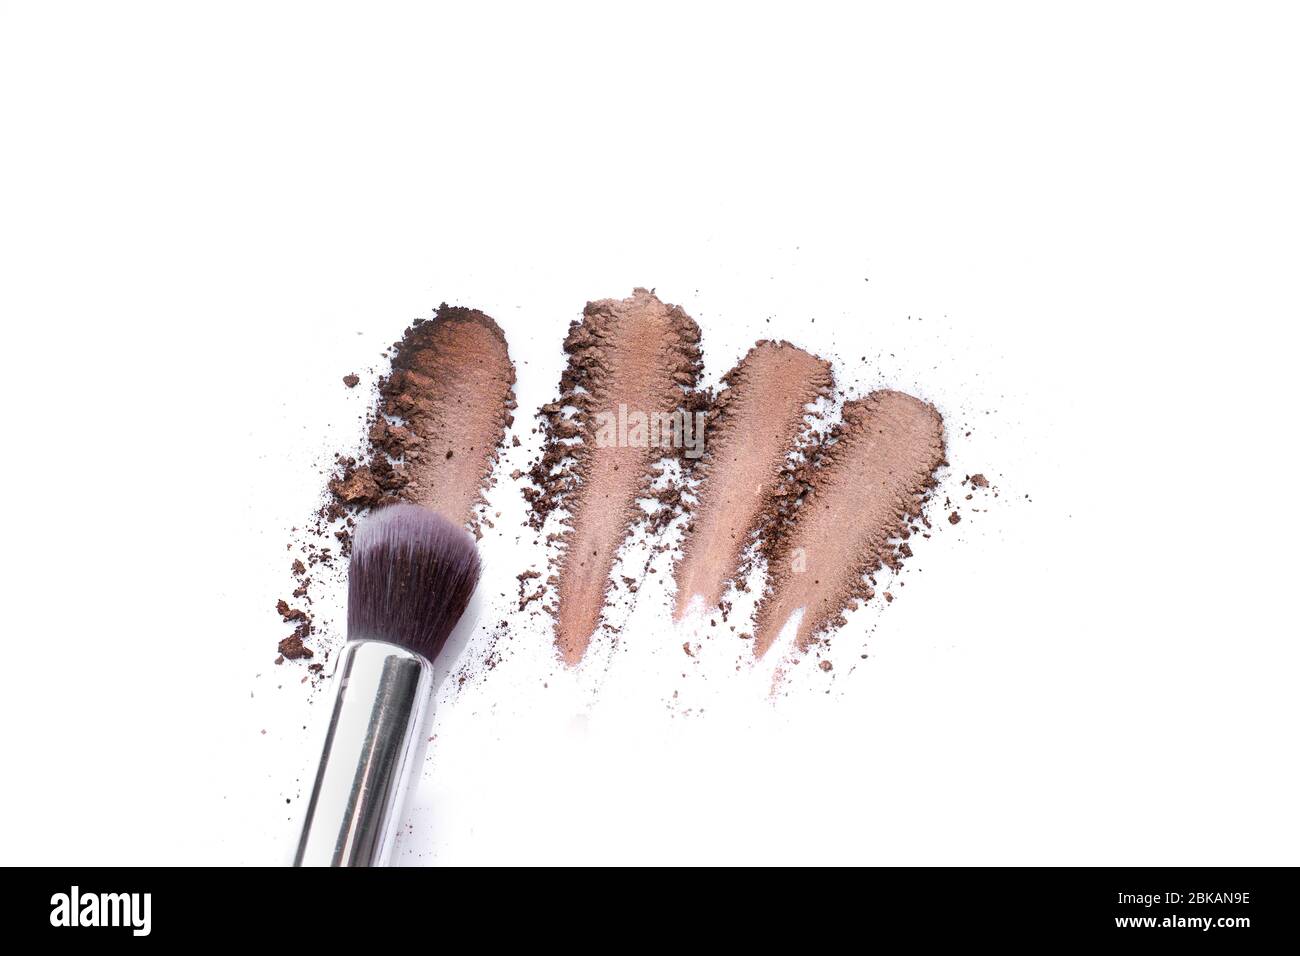 Make up brushes and brown eye shadows on black background. Stock Photo